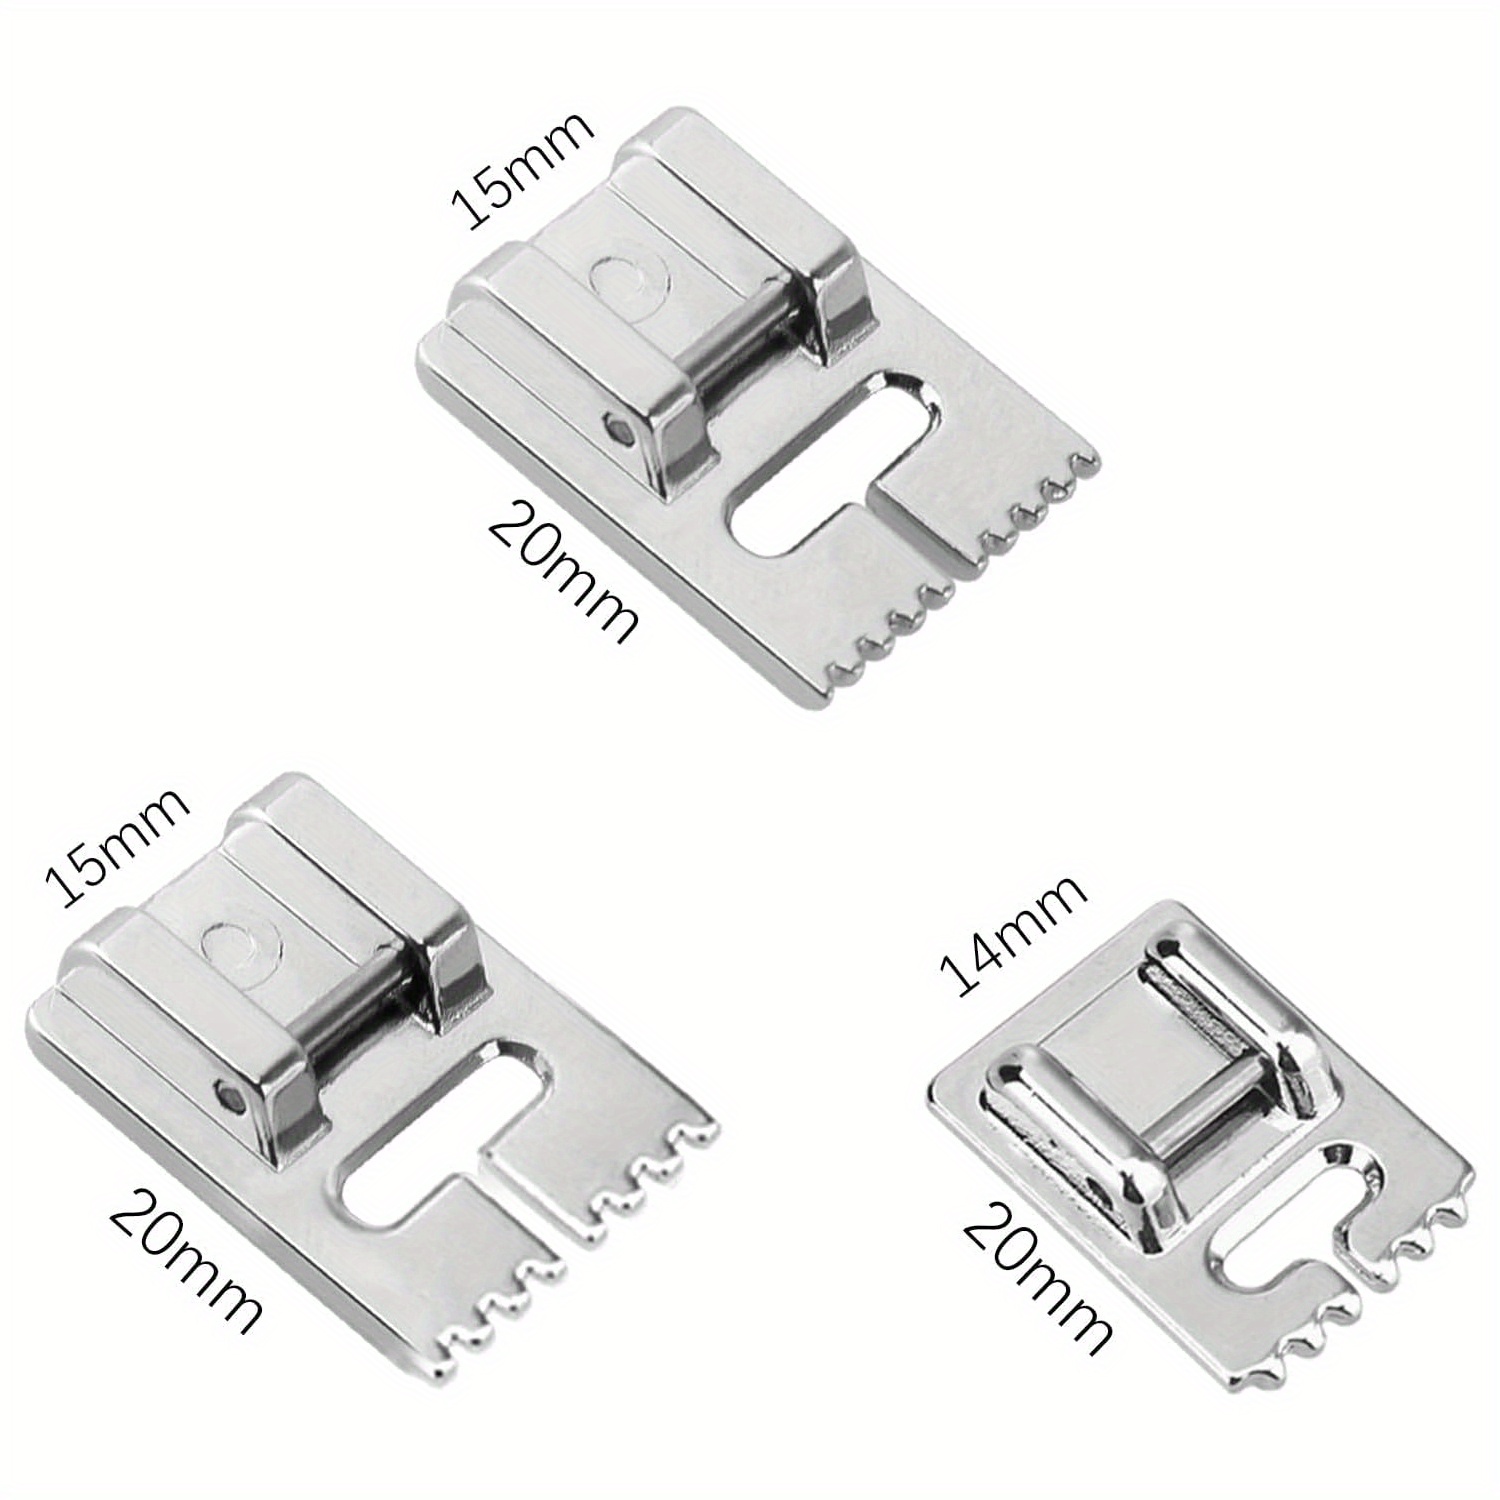 Metal Sewing Machine Presser Foot with 3 Sizes Double Twin